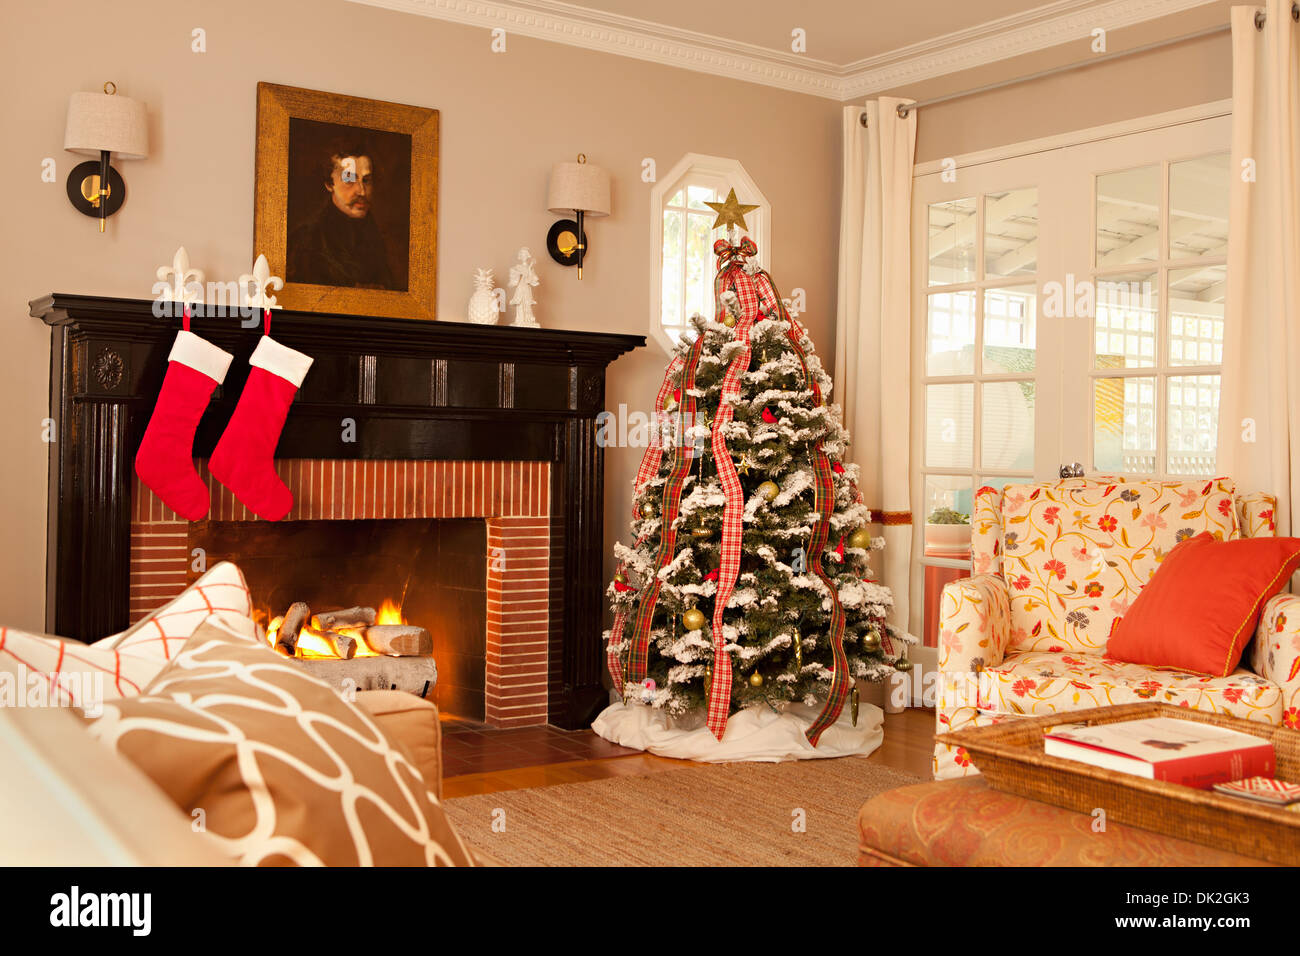 Elegant Living Room With Fireplace Decorated With Christmas Tree